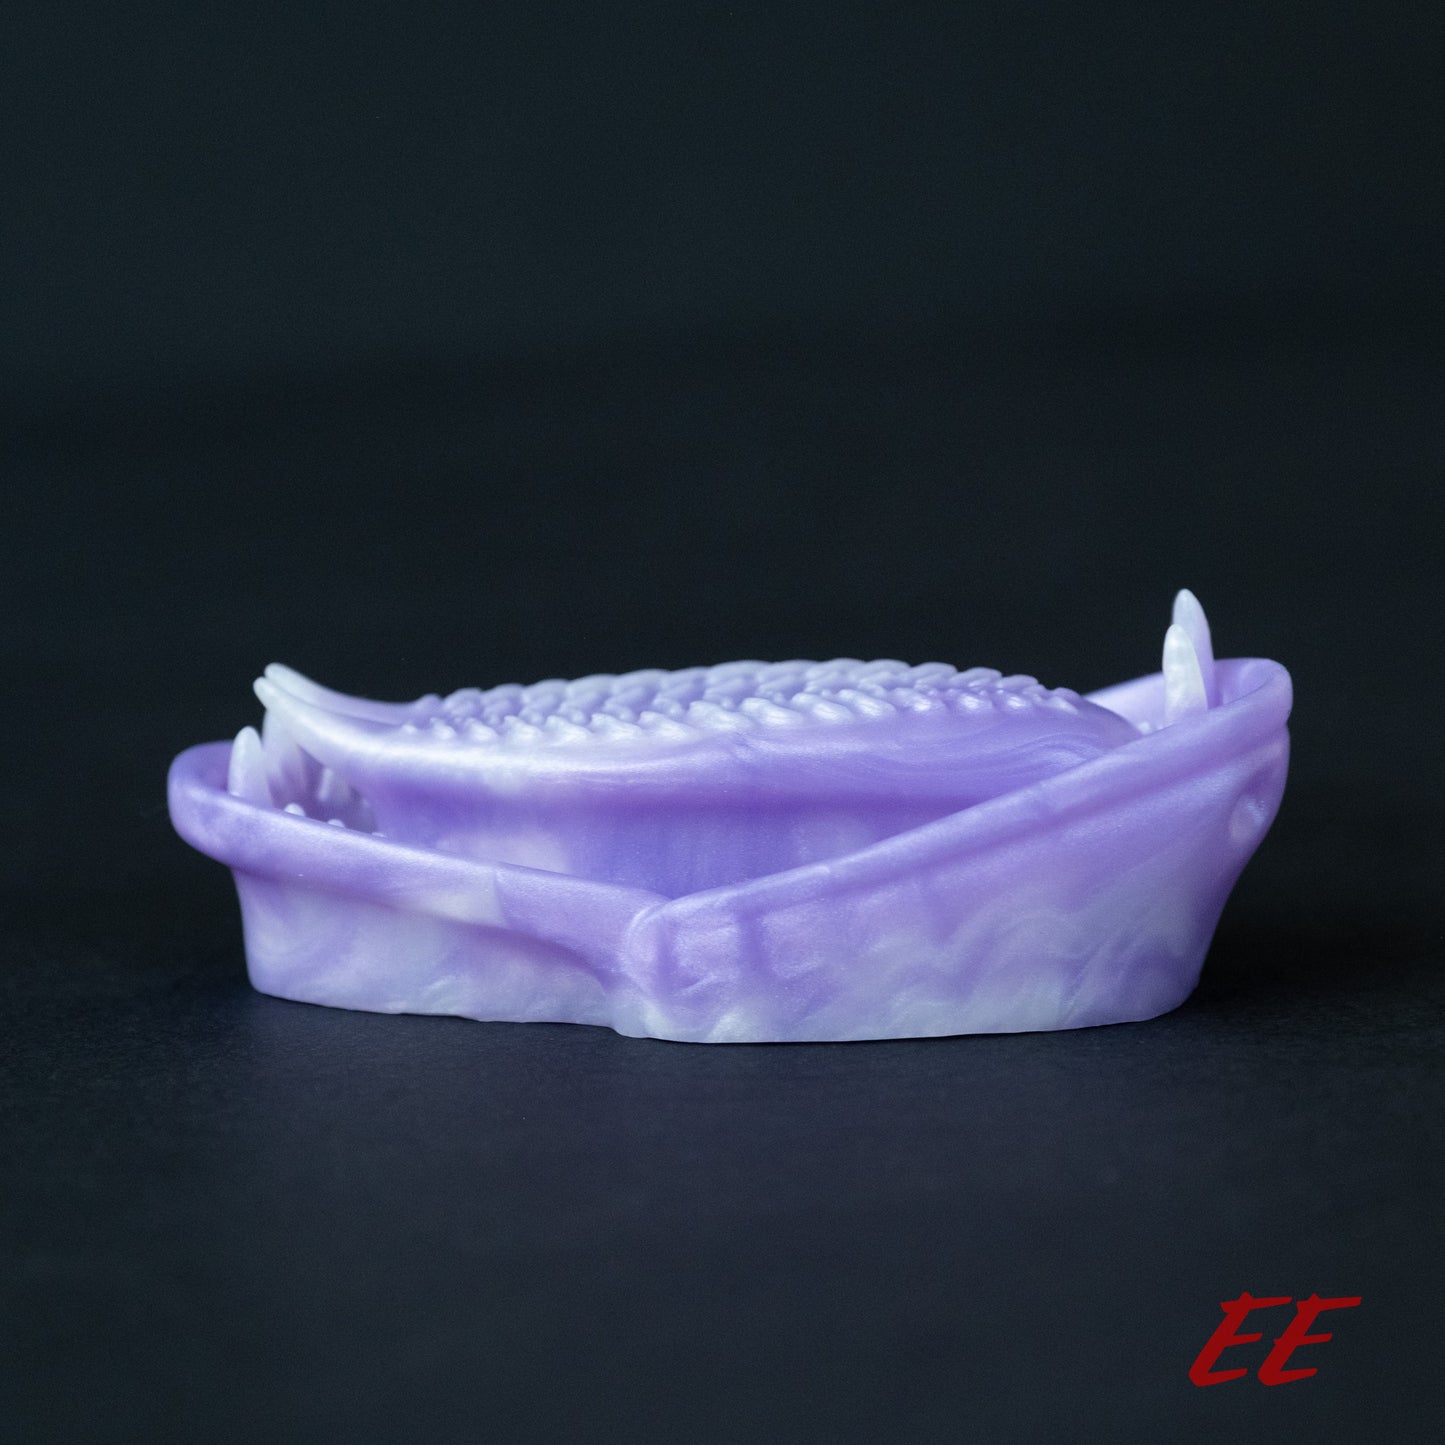 Ecthir Silicone Grindable - Lavender/White Shimmer - Medium Firmness